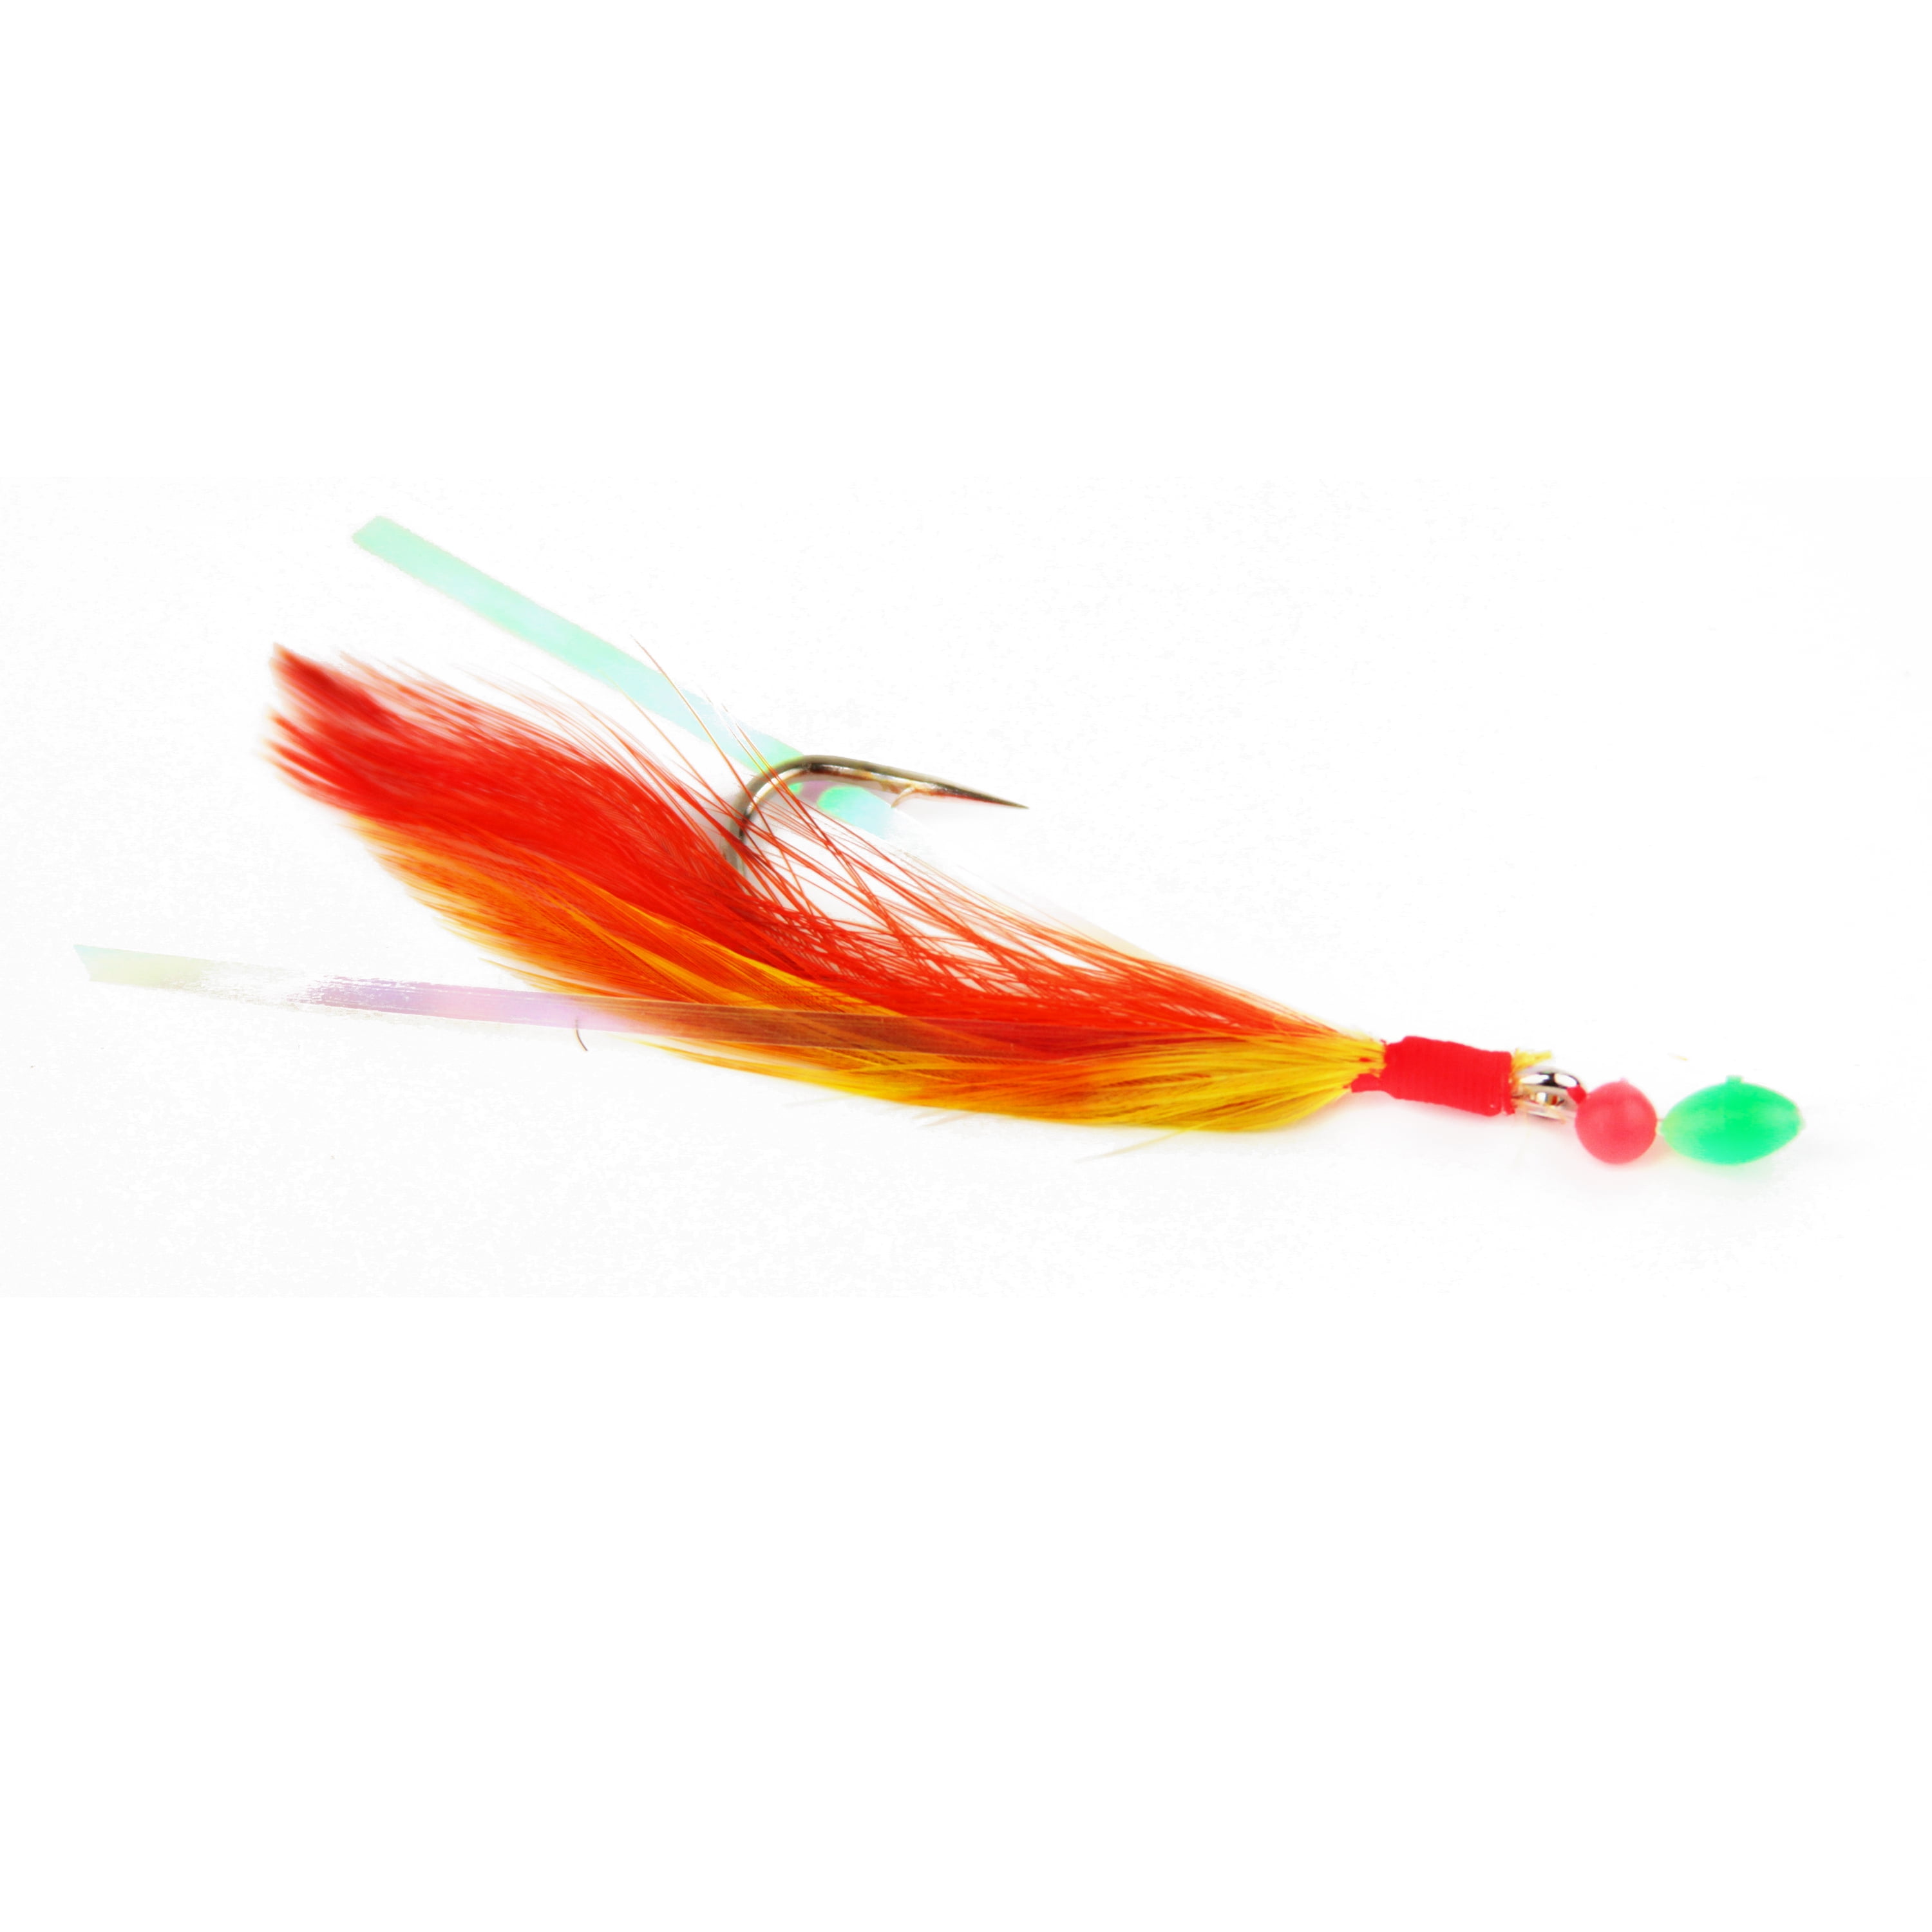  Fish Wow! 20 Packs 5/0 Hook Fishing Shrimp Flying Rig - Red/Yellow  : Sports & Outdoors